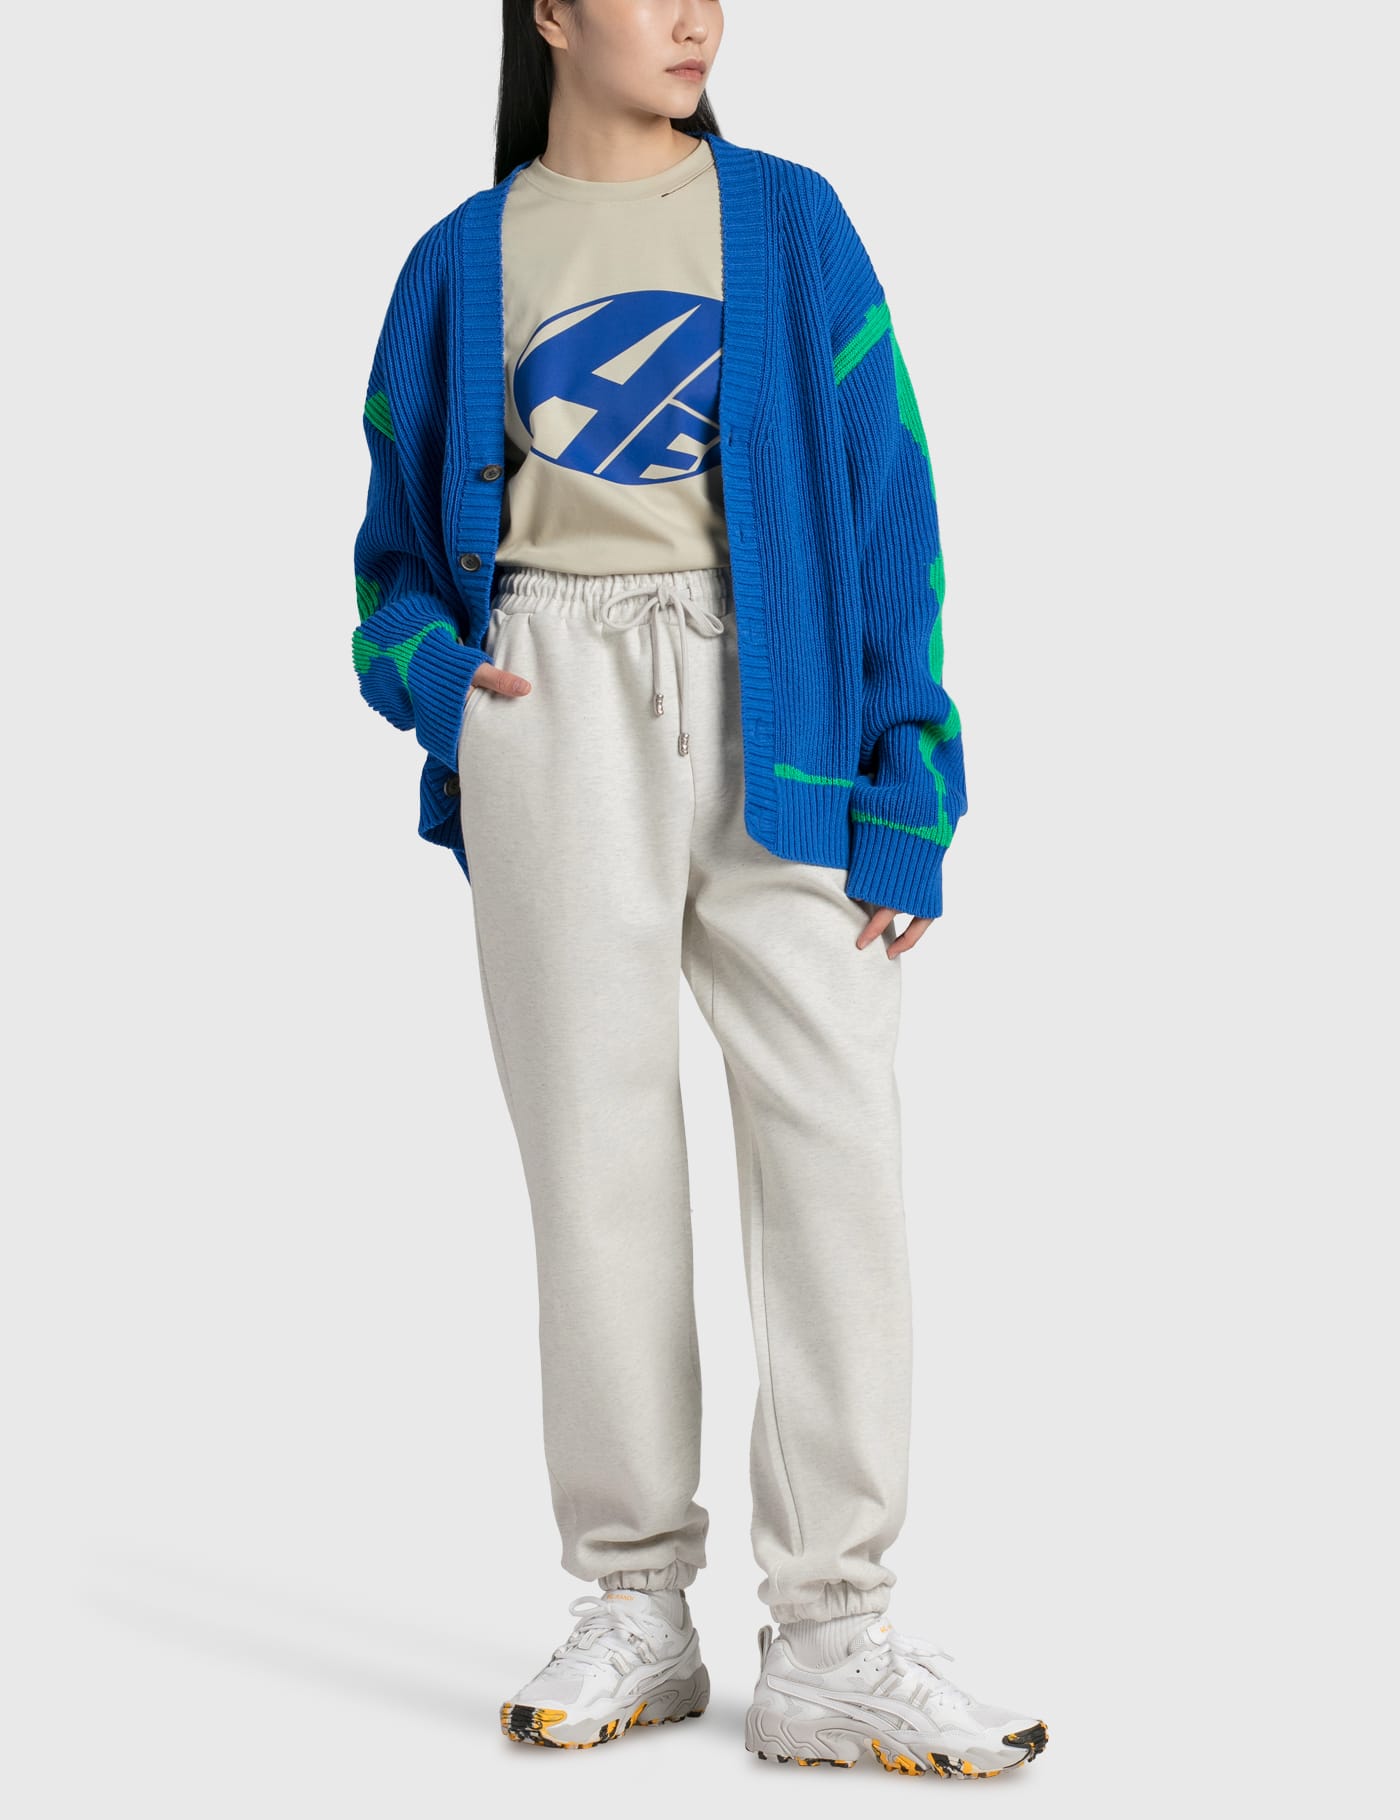 Ader Error - Benny Cardigan | HBX - Globally Curated Fashion and 